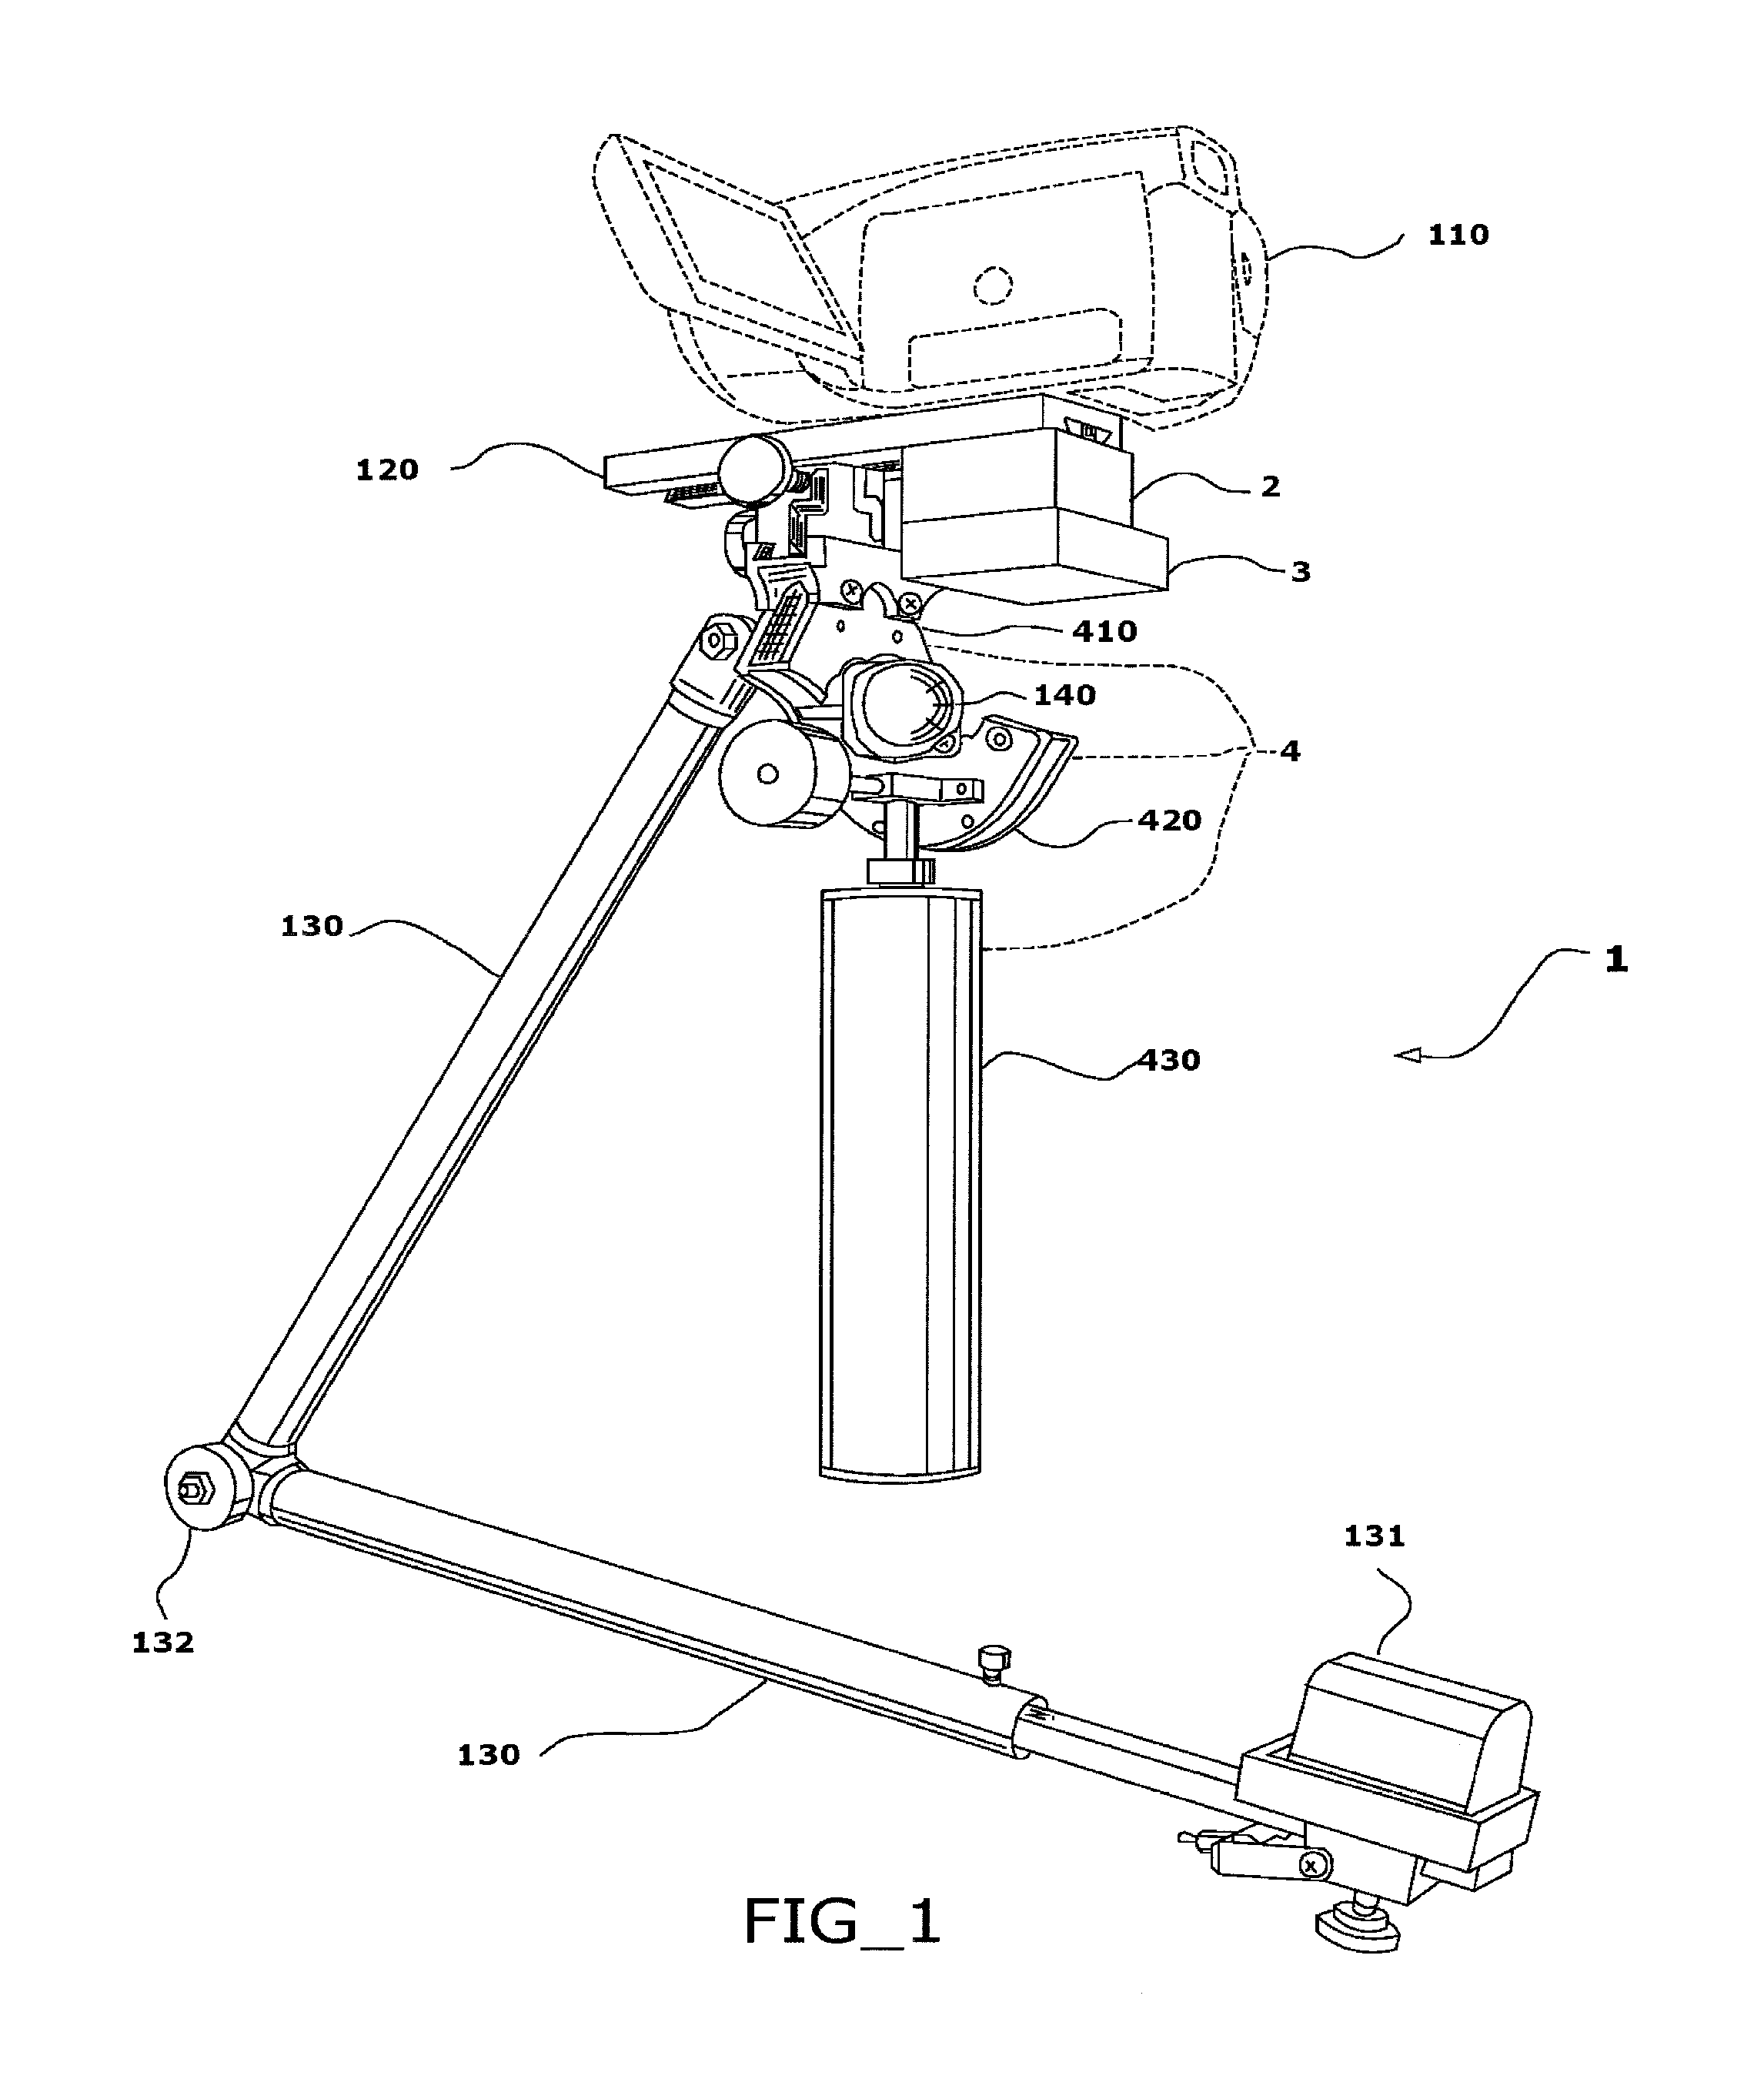 Actively stabilized payload support apparatus and methods